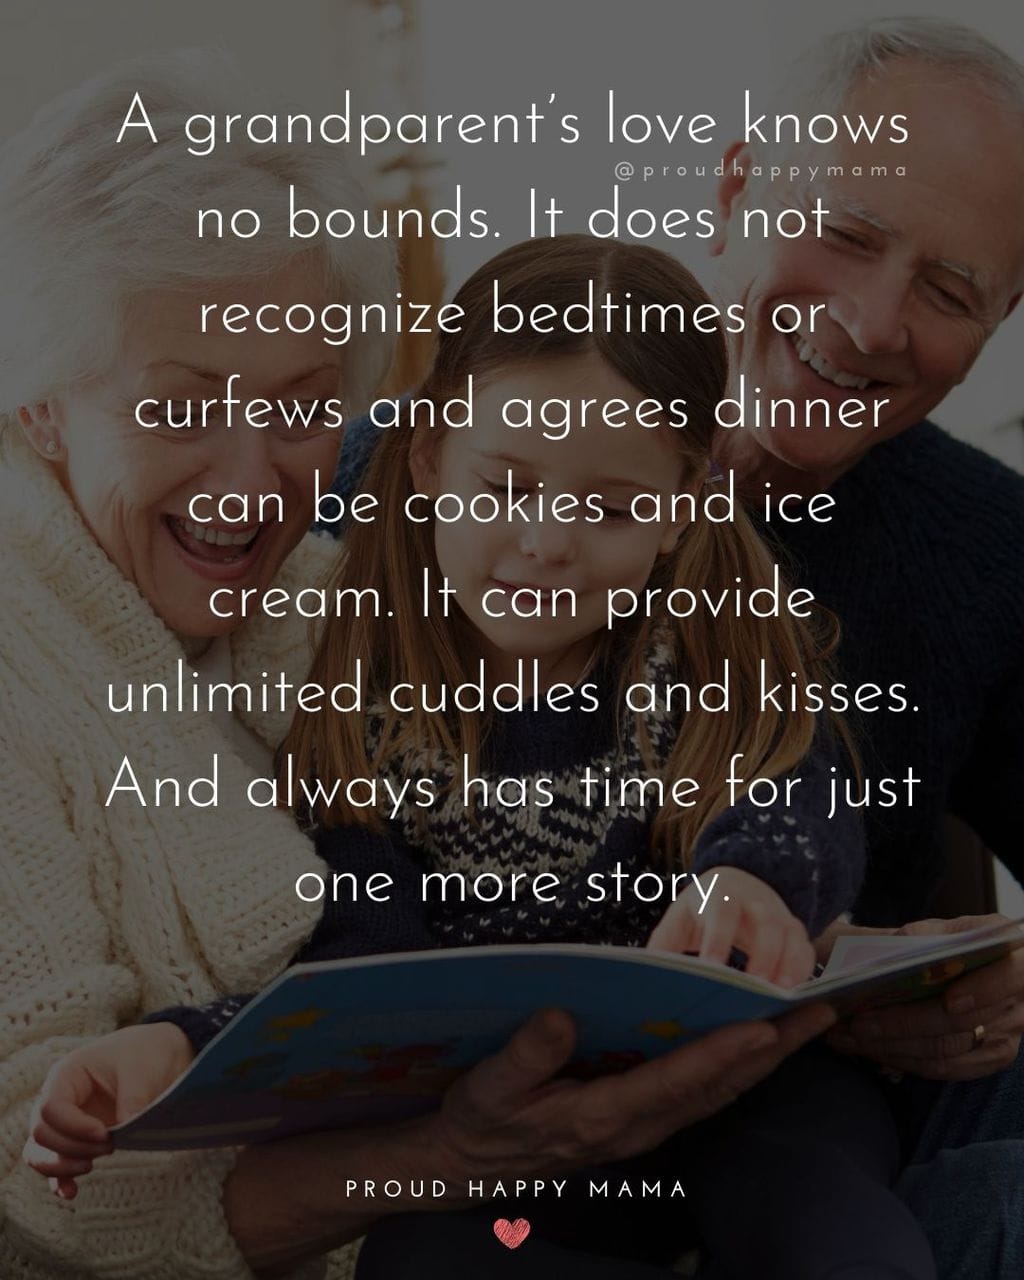 Grandparents Sayings | A grandparent’s love knows no bounds. It does not recognize bedtimes or curfews and agrees dinner can be cookies and ice cream. It can provide unlimited cuddles and kisses. And always has time for just one more story.